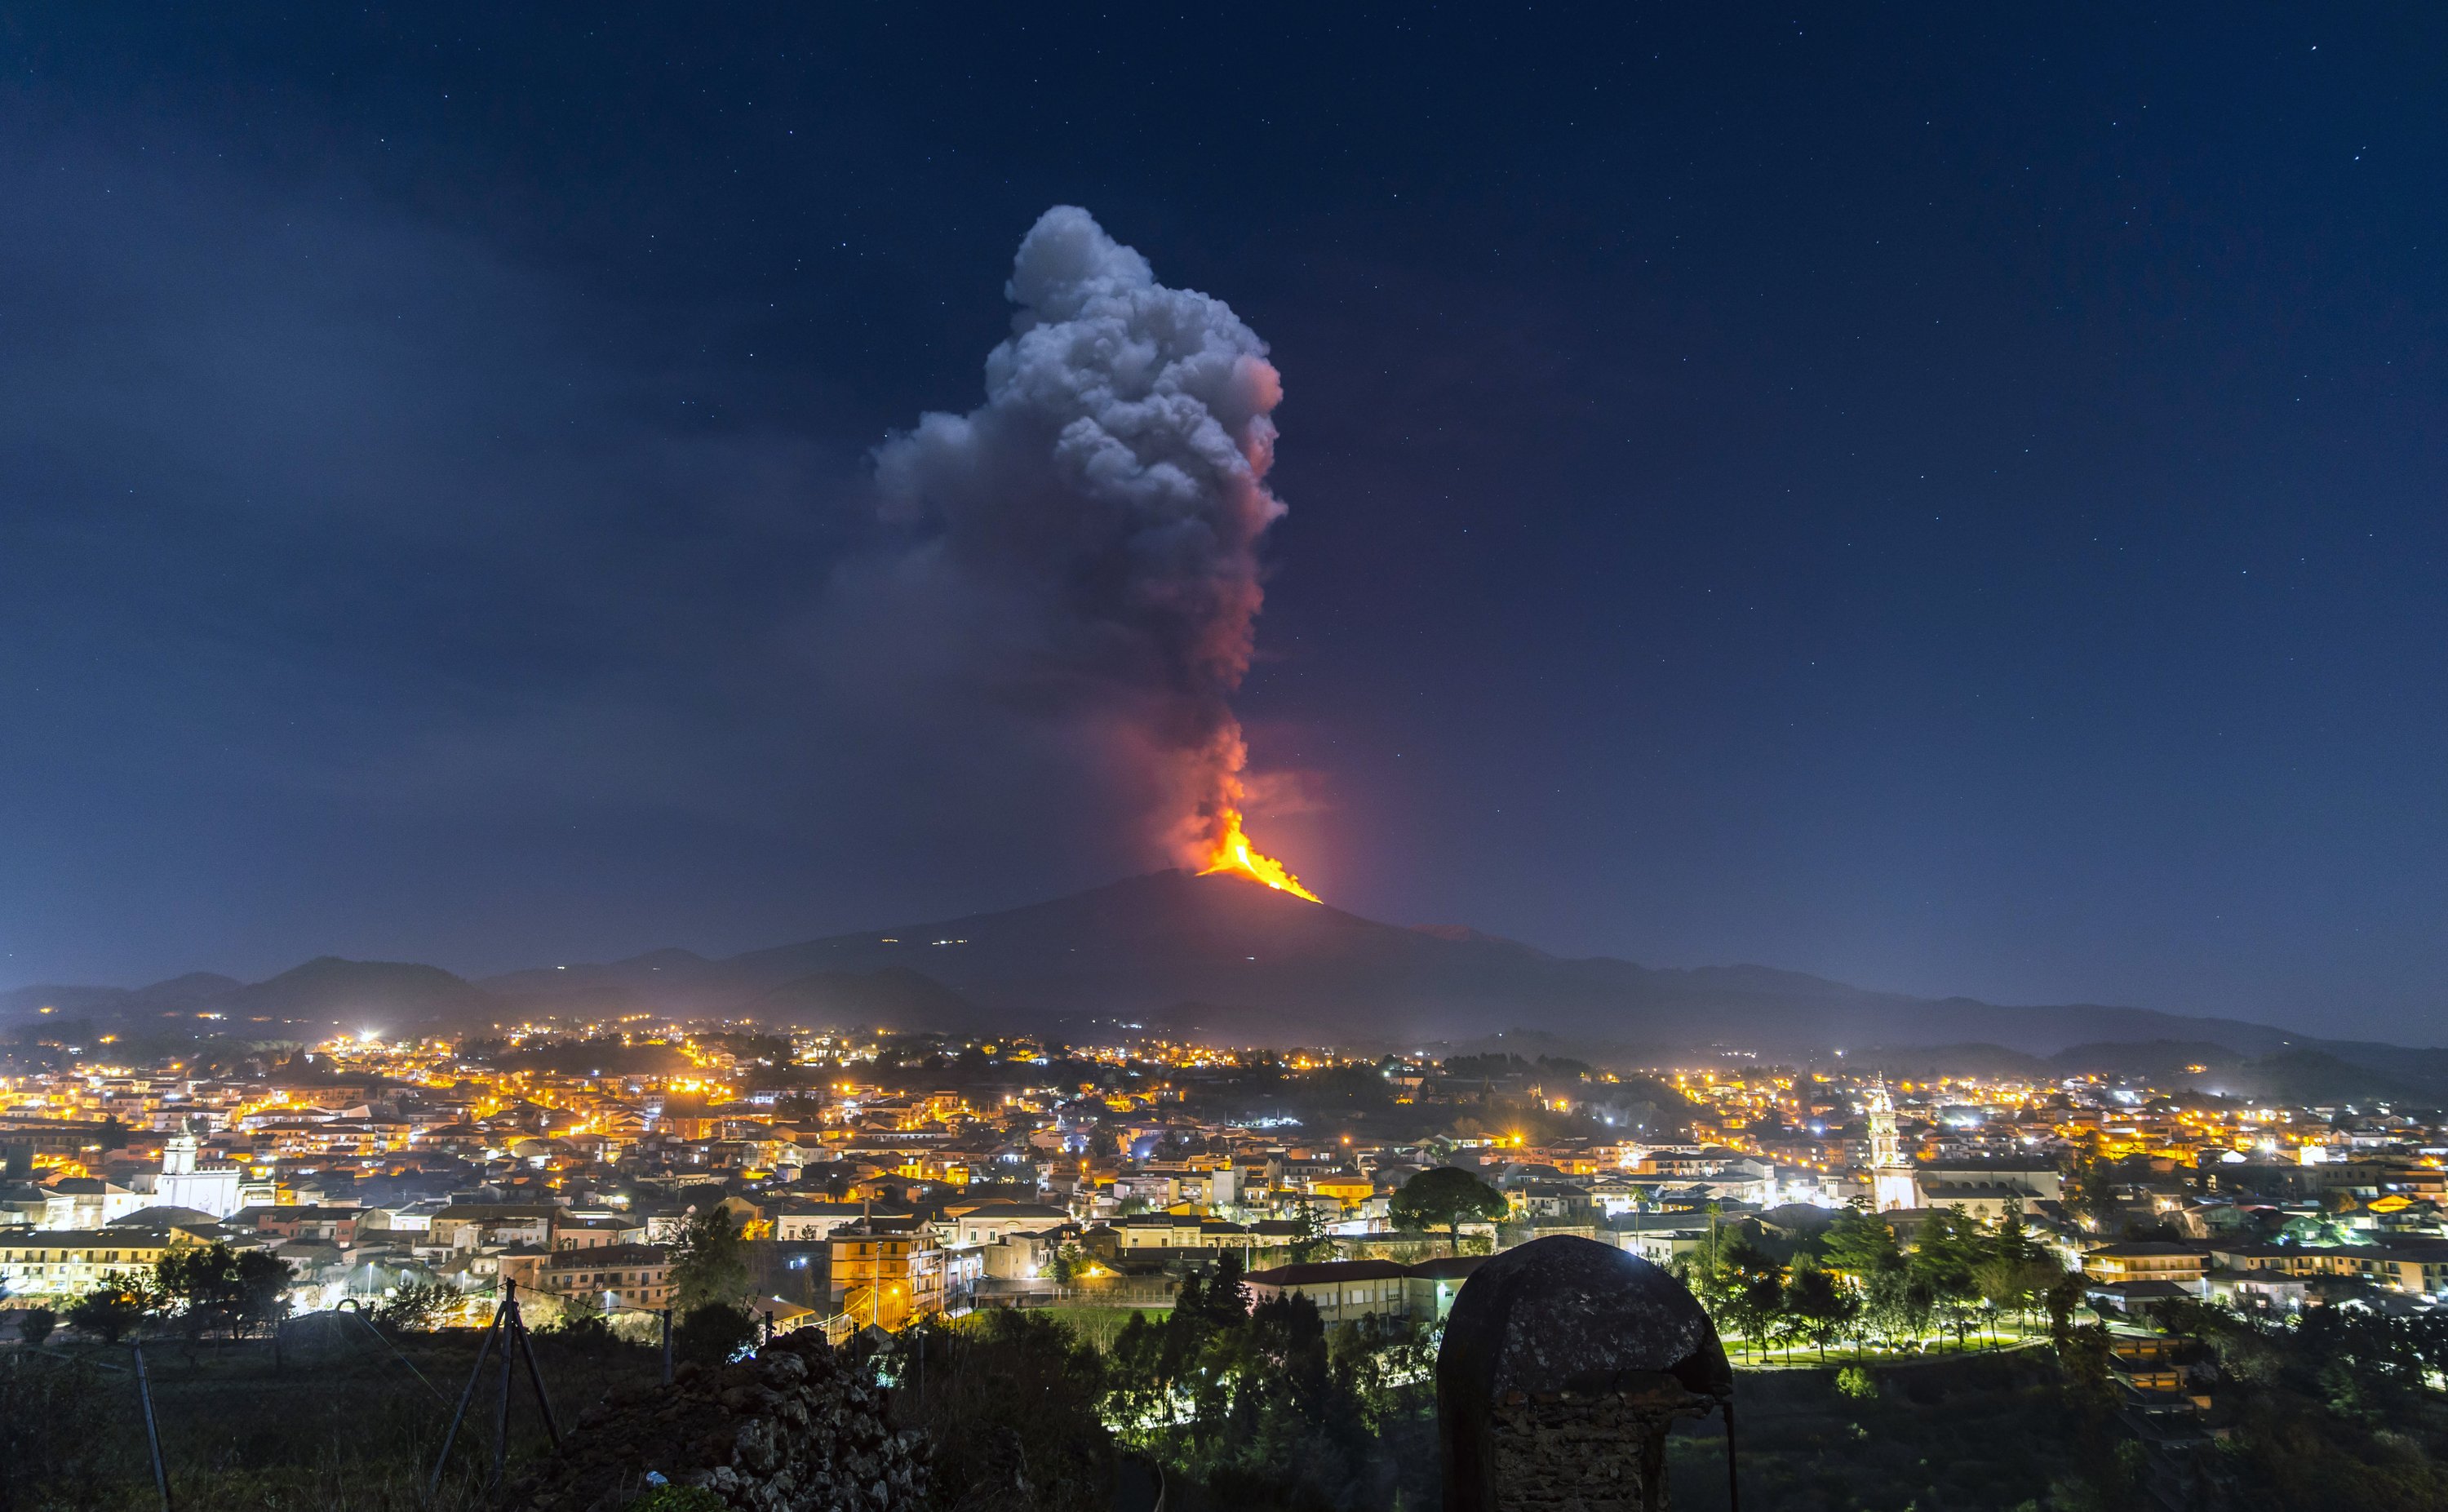 Mount Etna presents its latest spectacular show